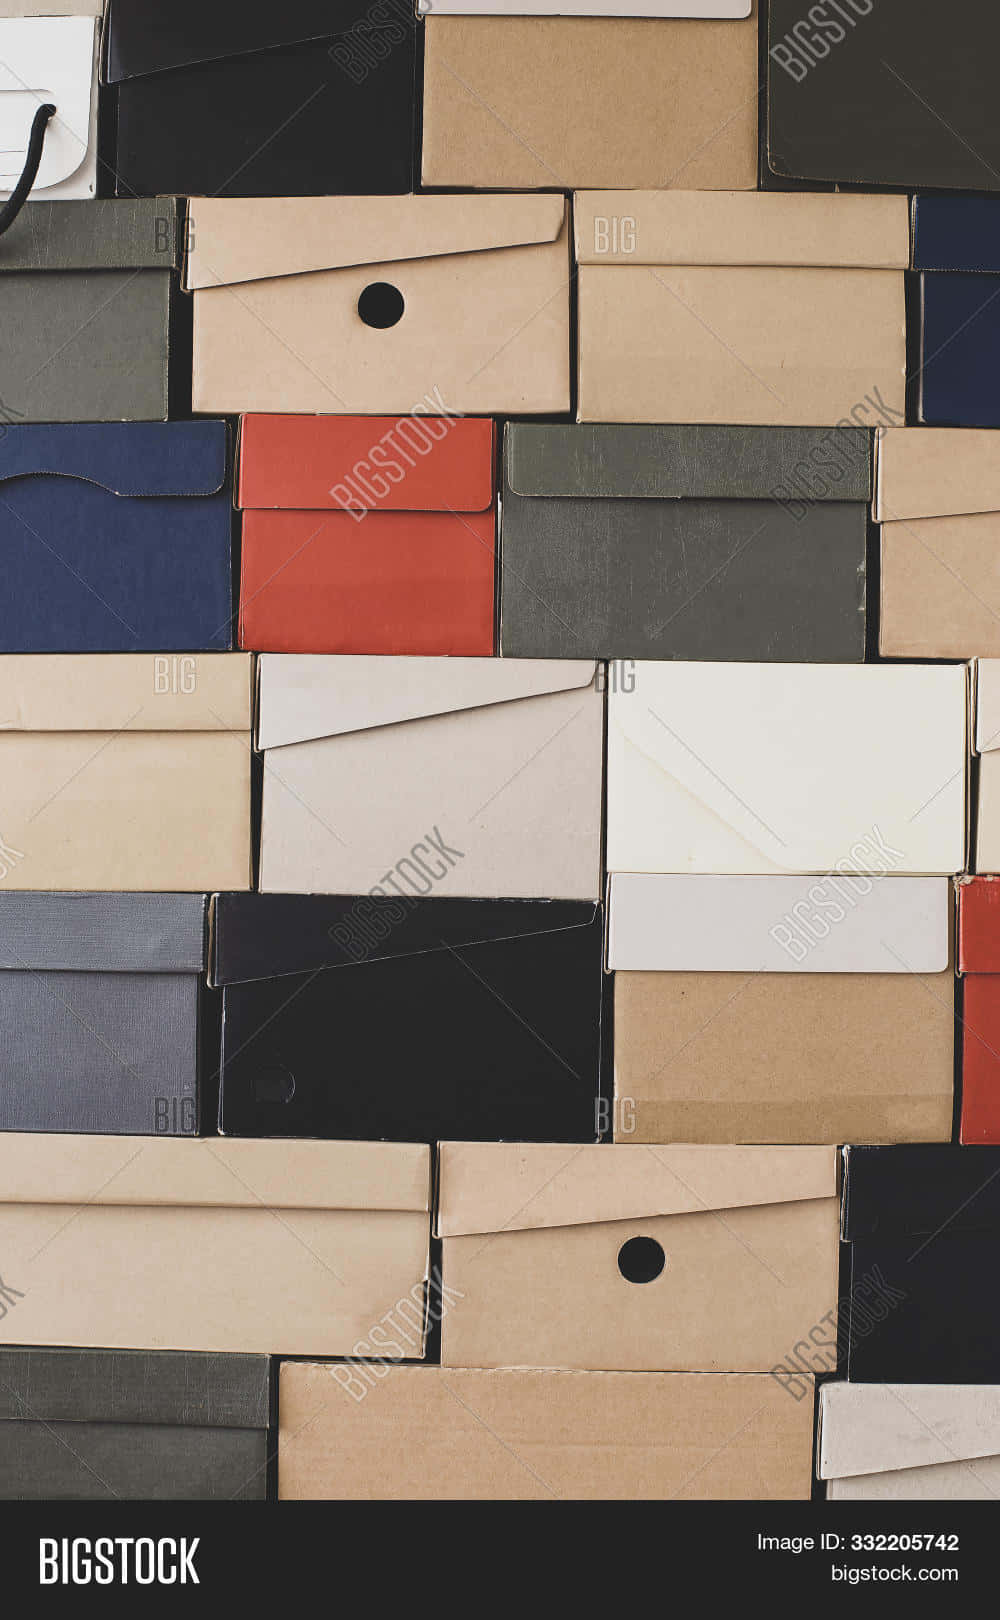 Freshen up your wardrobe with a selection of new shoes in one easy Shoe Box! Wallpaper